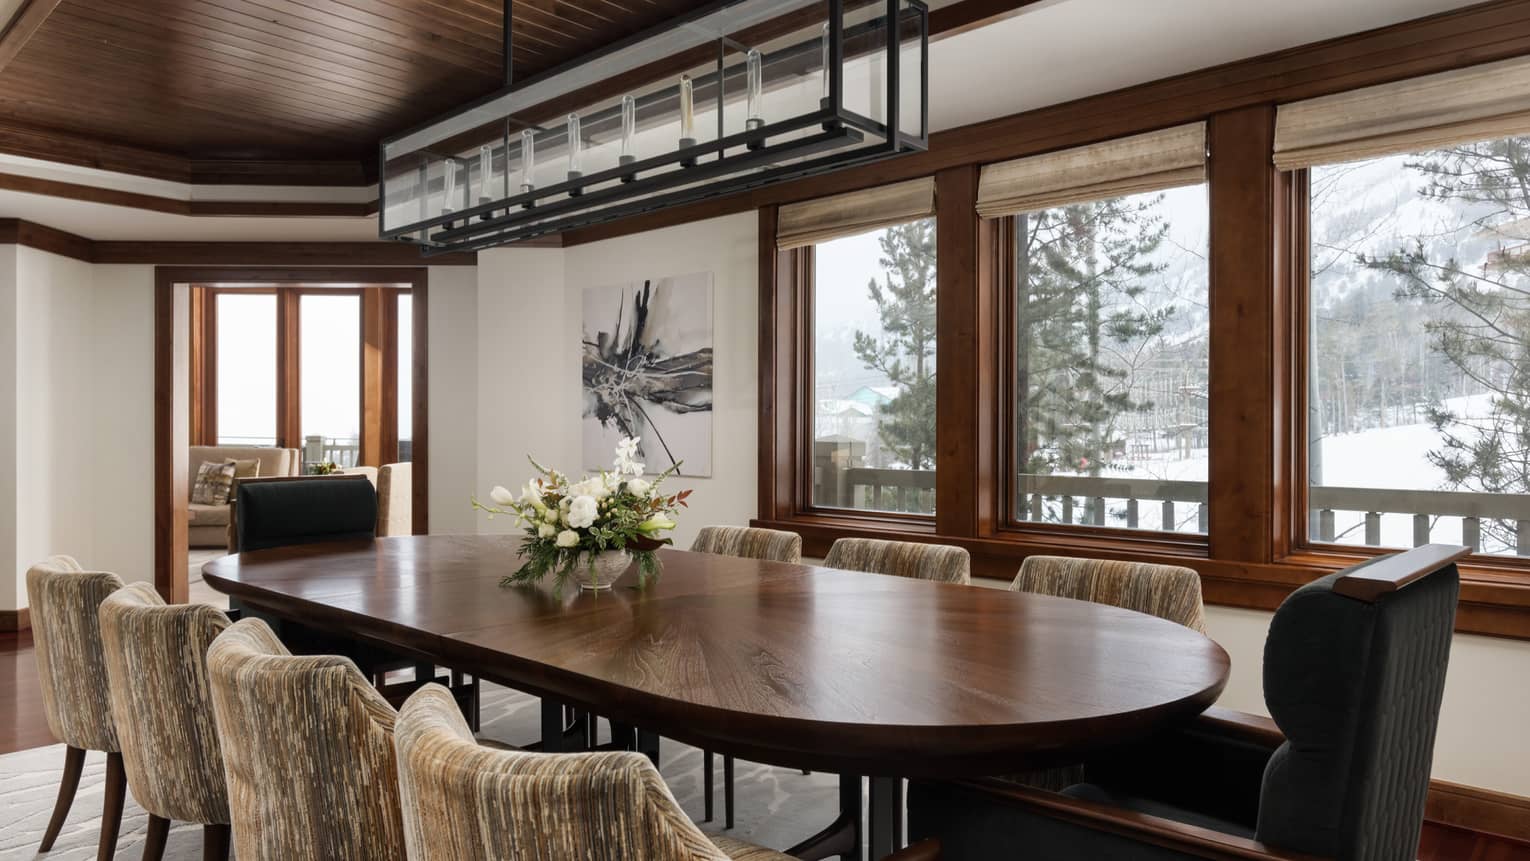 Living room with large wooden table, 10 upholstered chairs, ski slope view